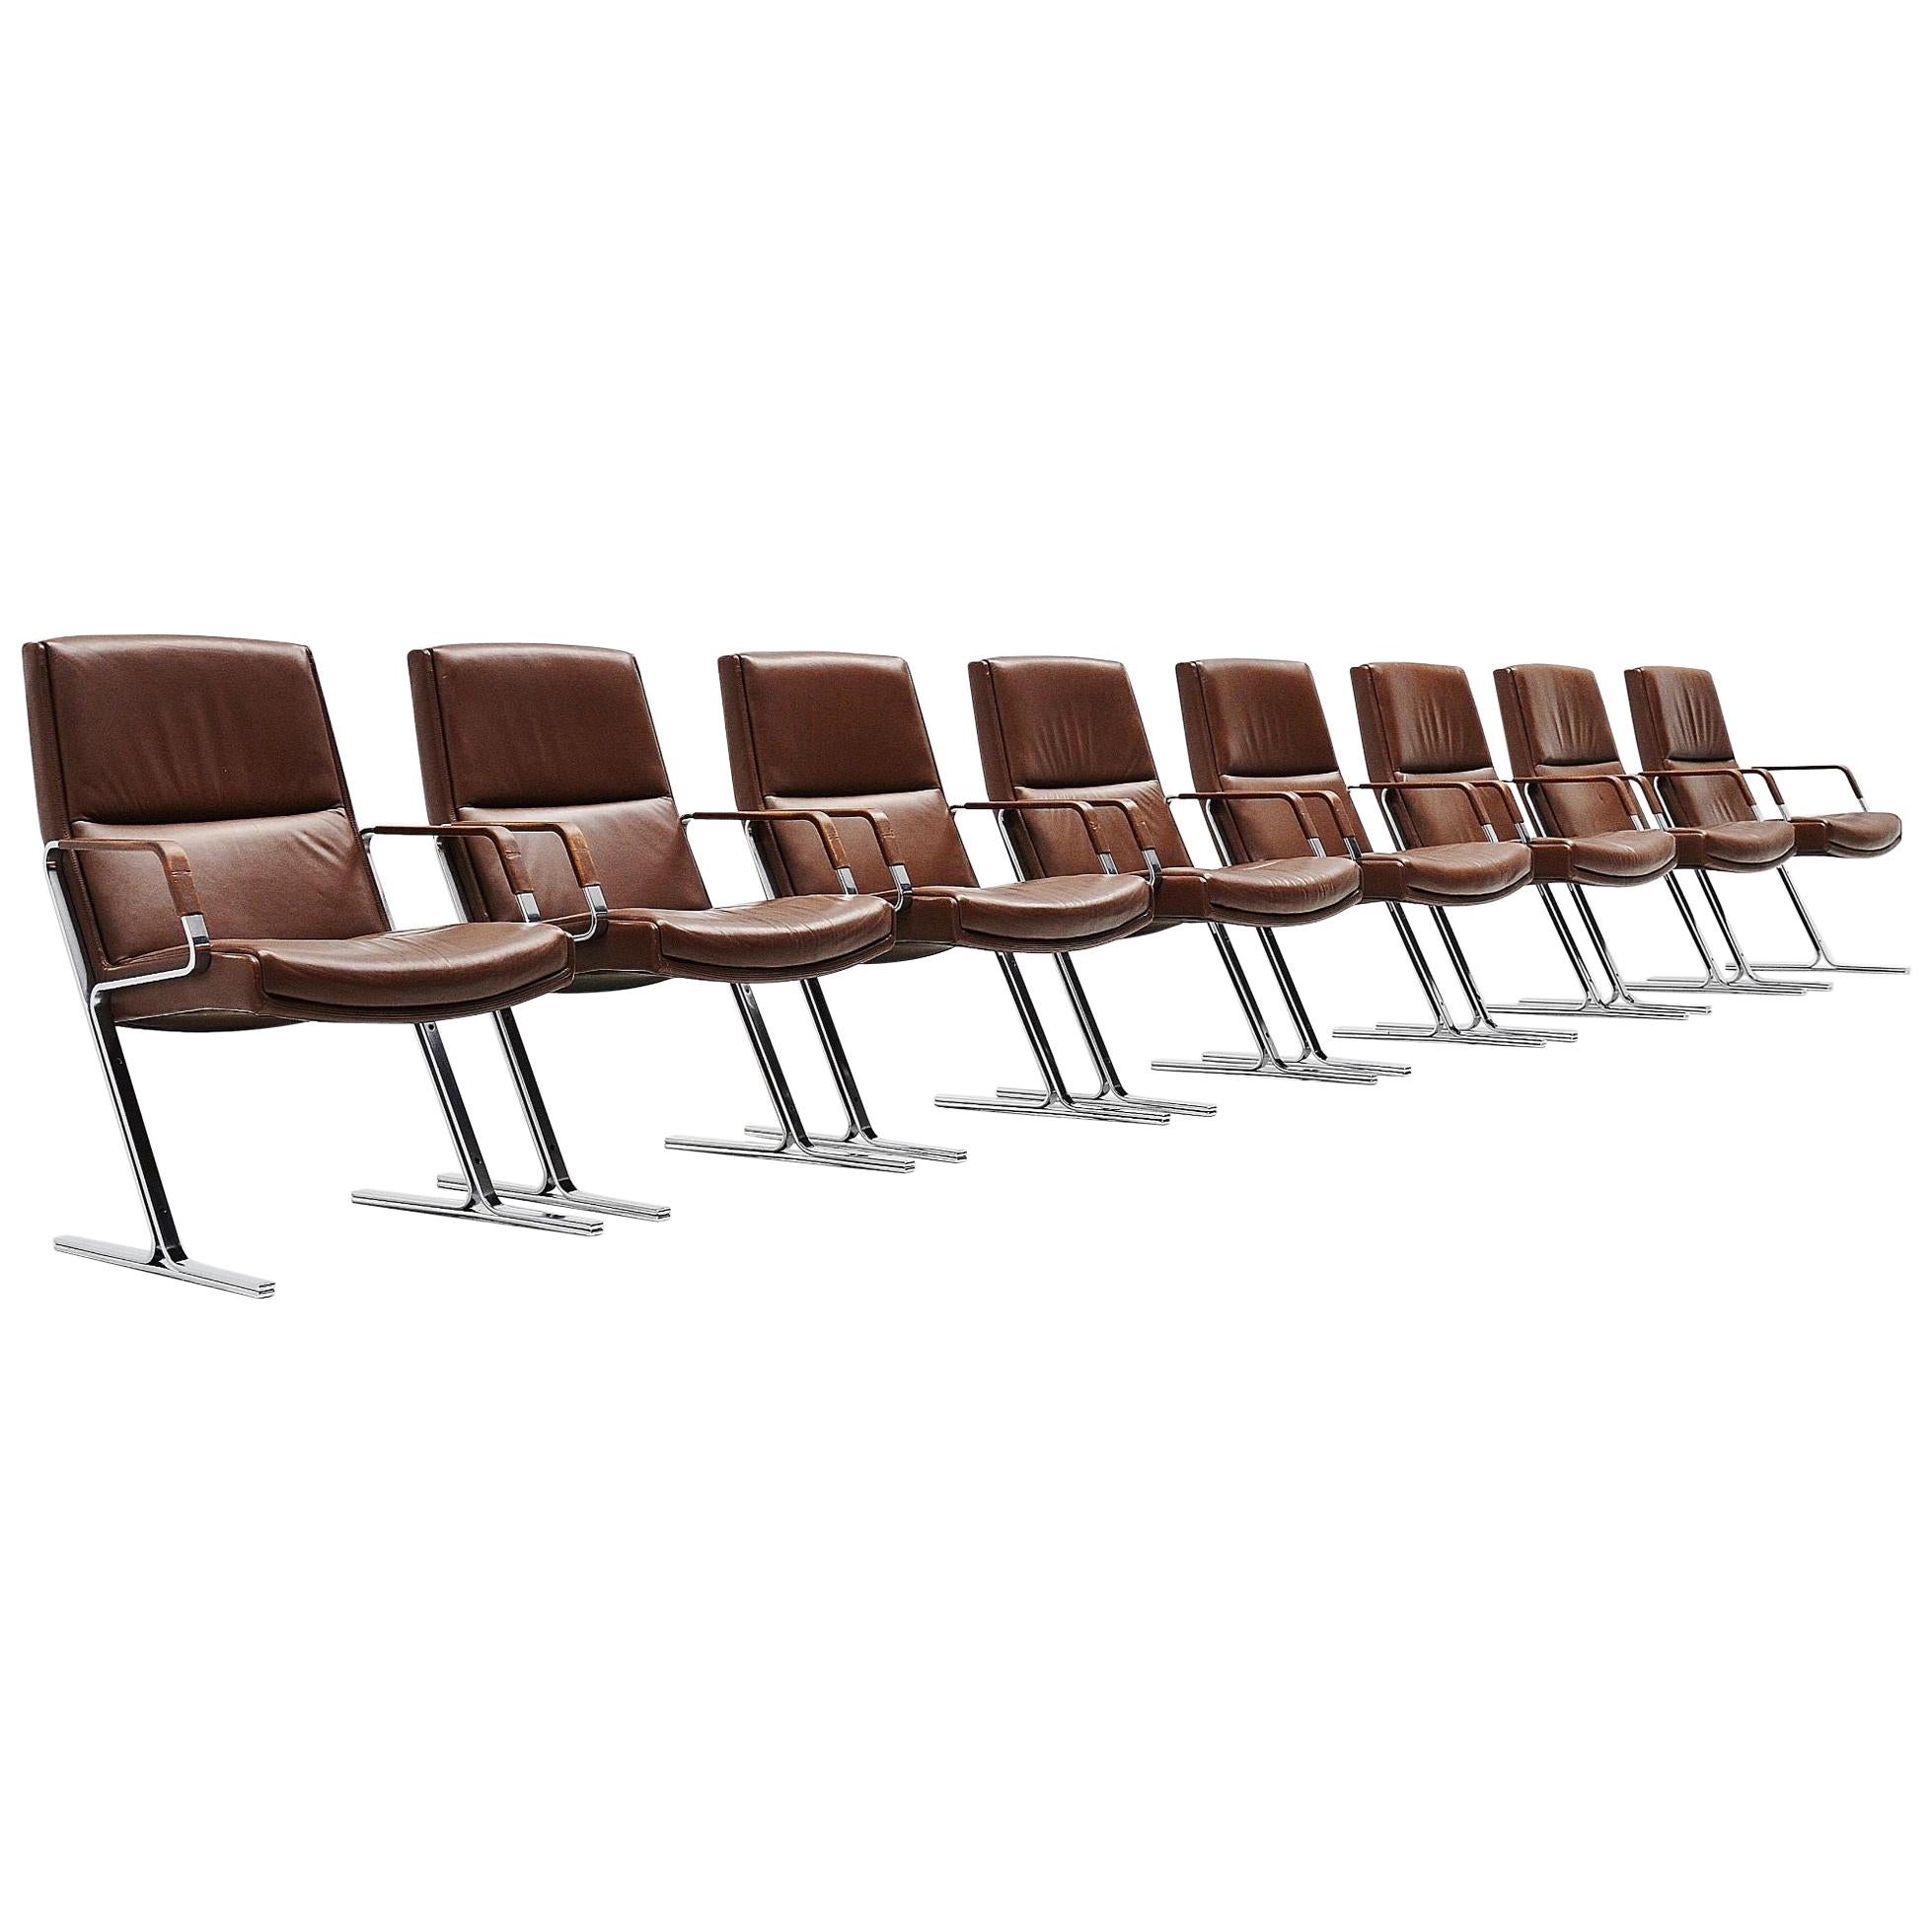 Fabricius Kastholm FK711 Office Chairs Walter Knoll, Germany, 1971 For Sale